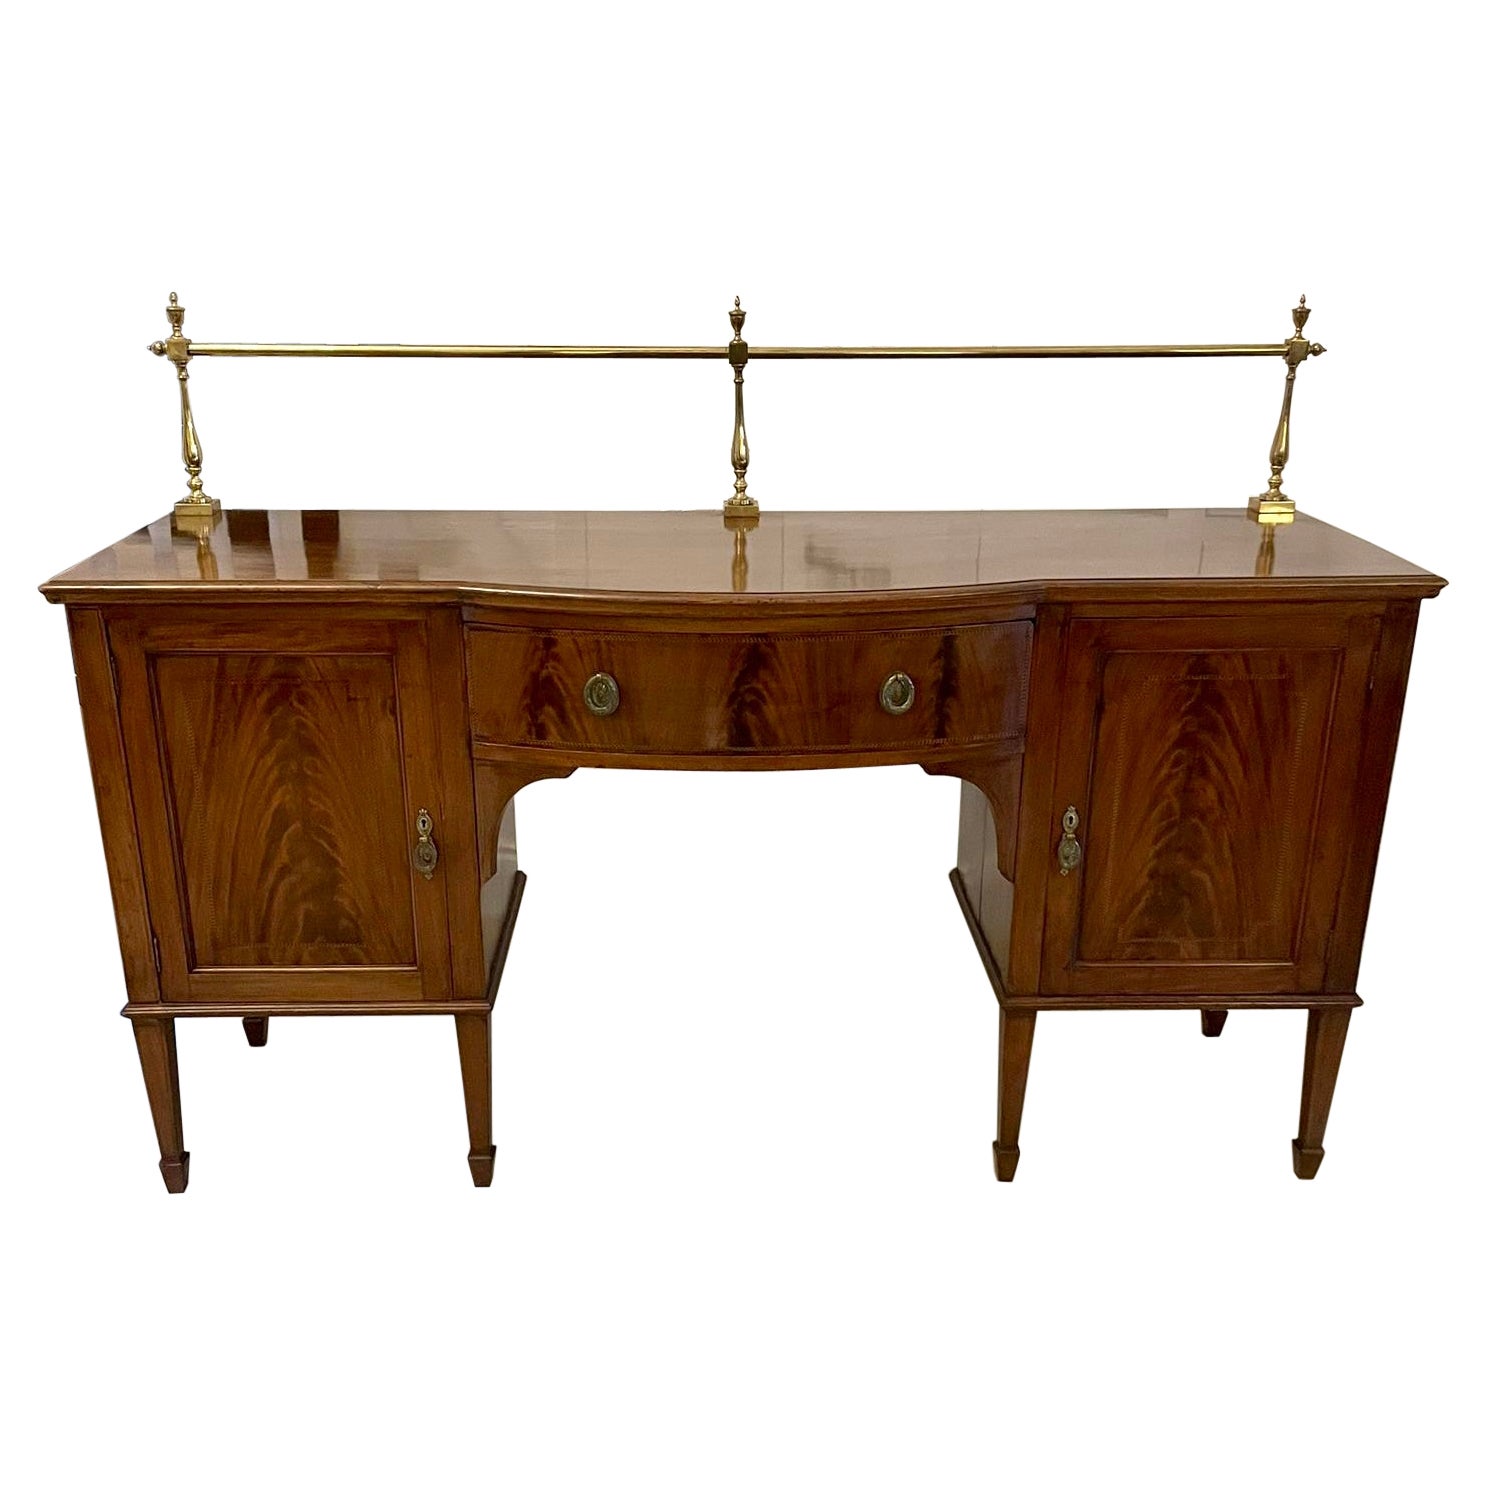 Antique Edwardian Mahogany Inlaid Sideboard by Hamptons and Sons